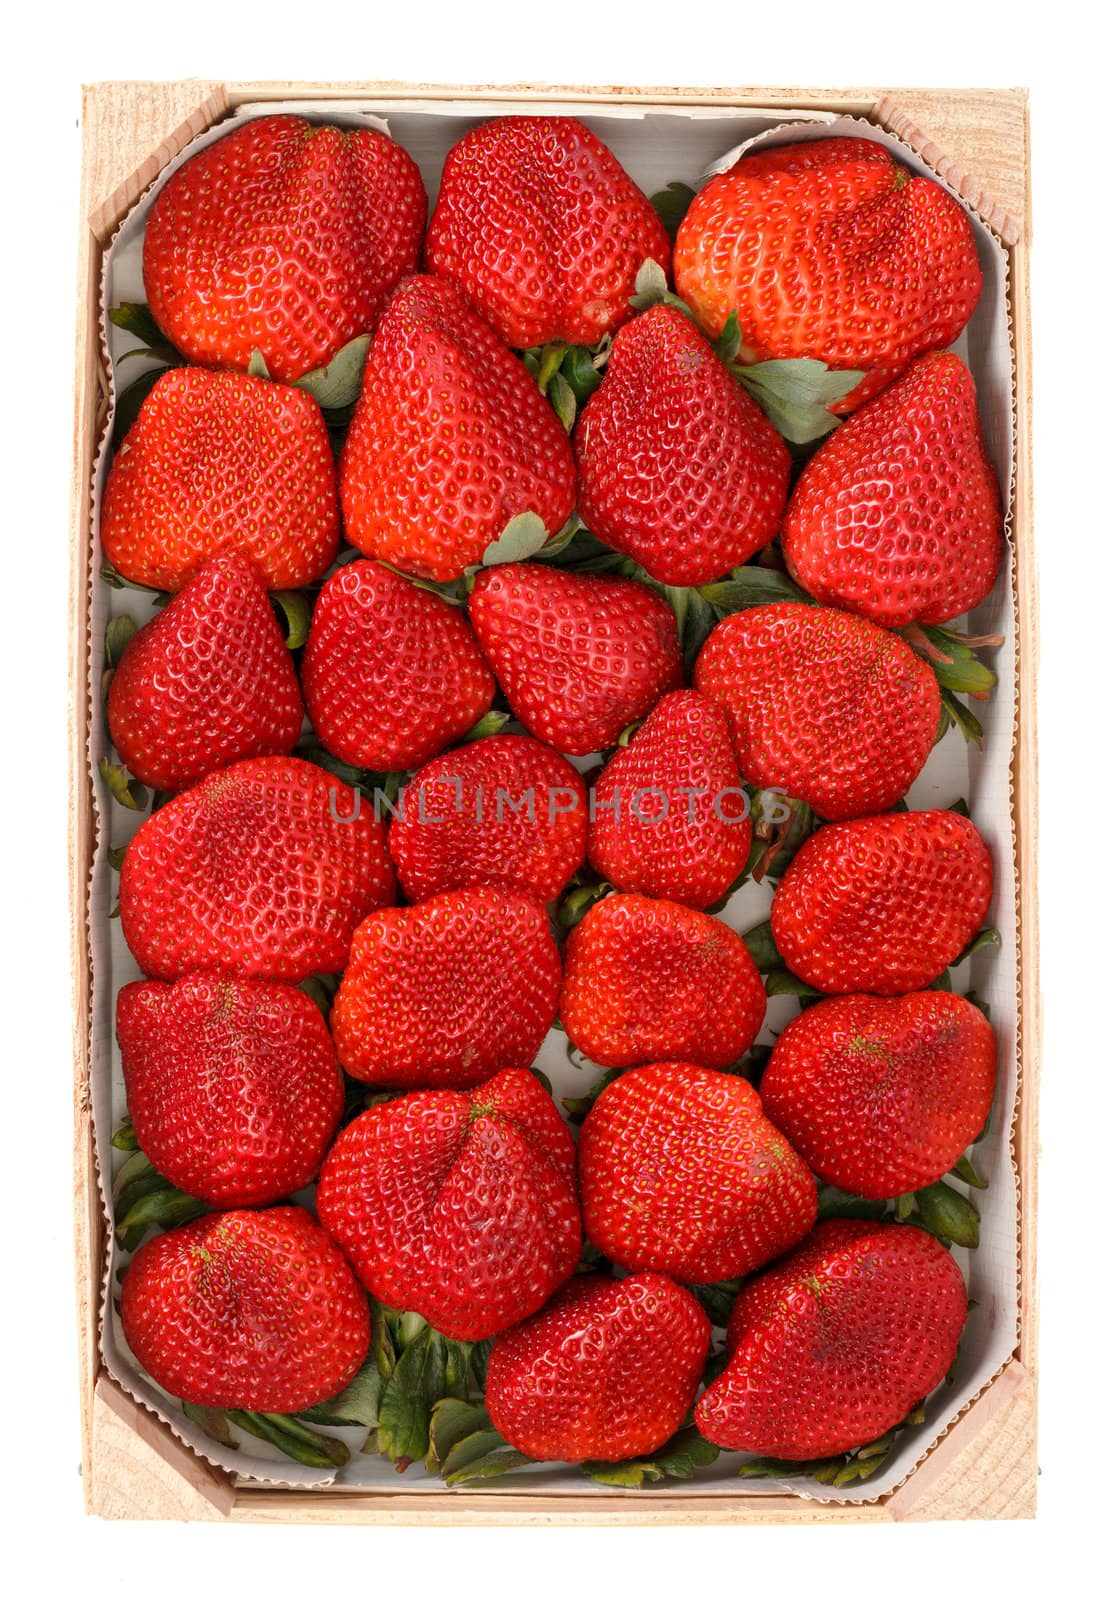 Heap red strawberries in the wooden box